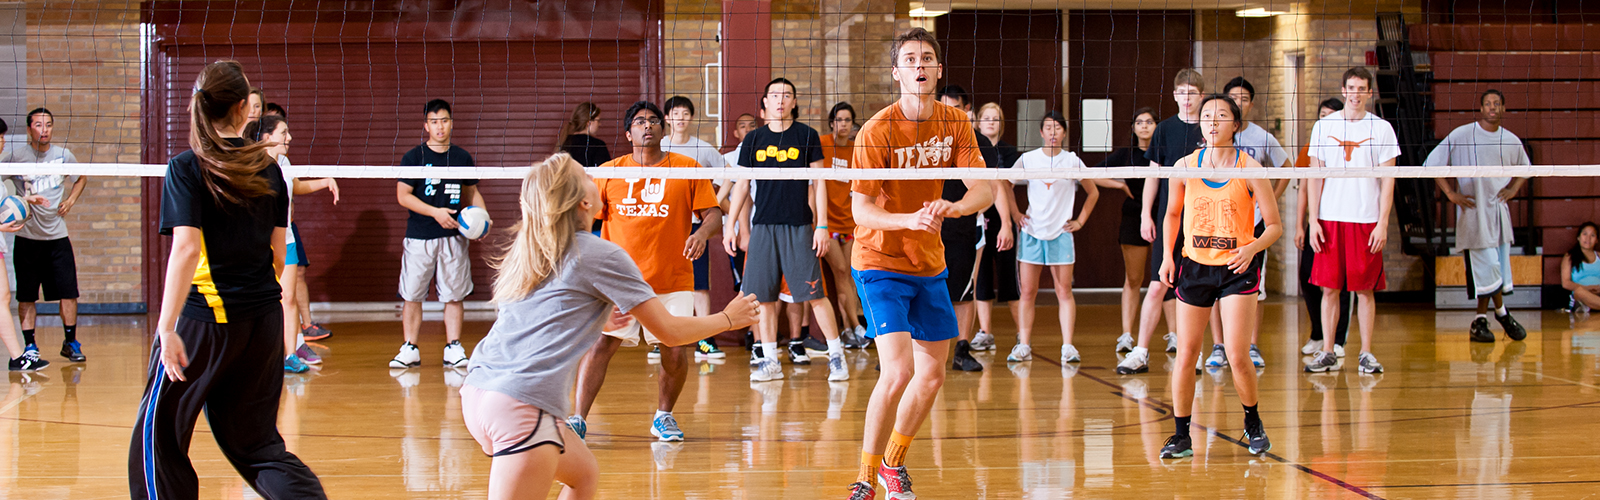 Students play volleyball in Gregory Gym